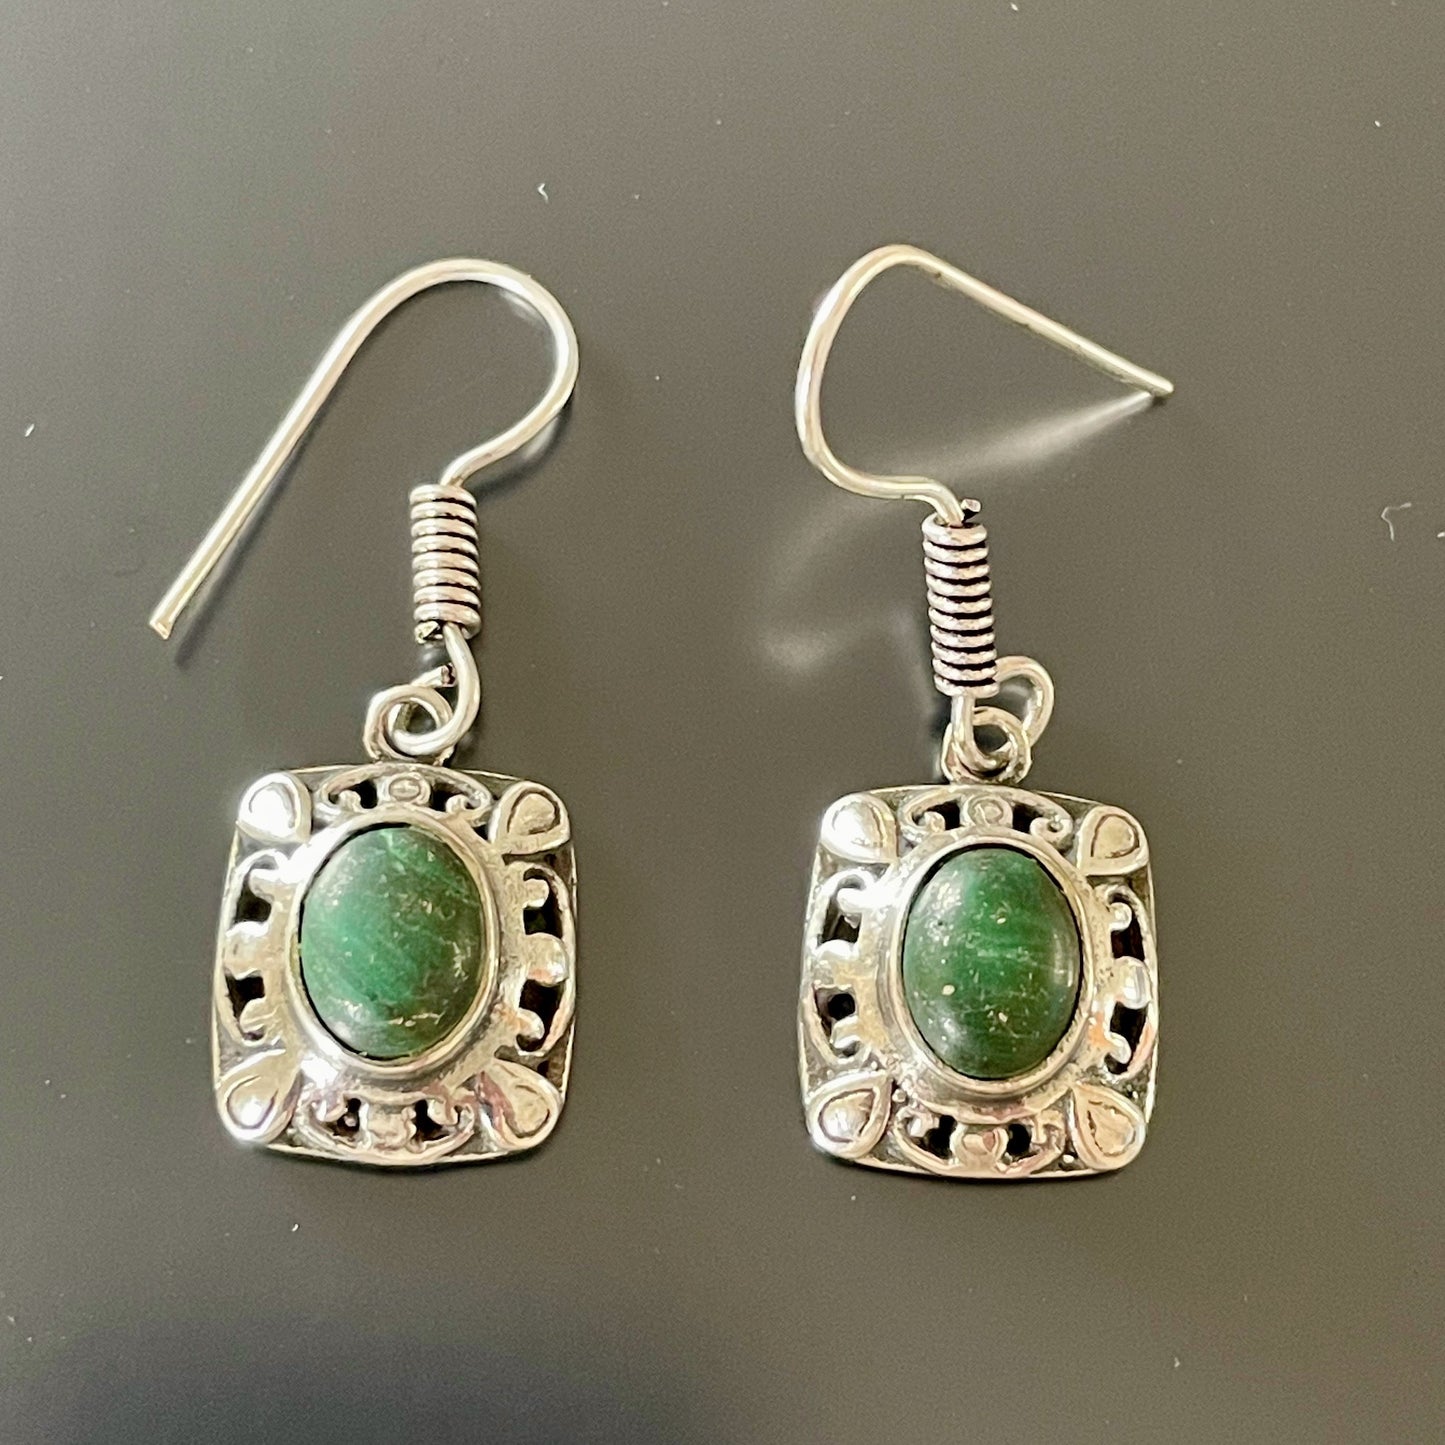 Fretwork Berber Silver Earrings with Oval green Stones